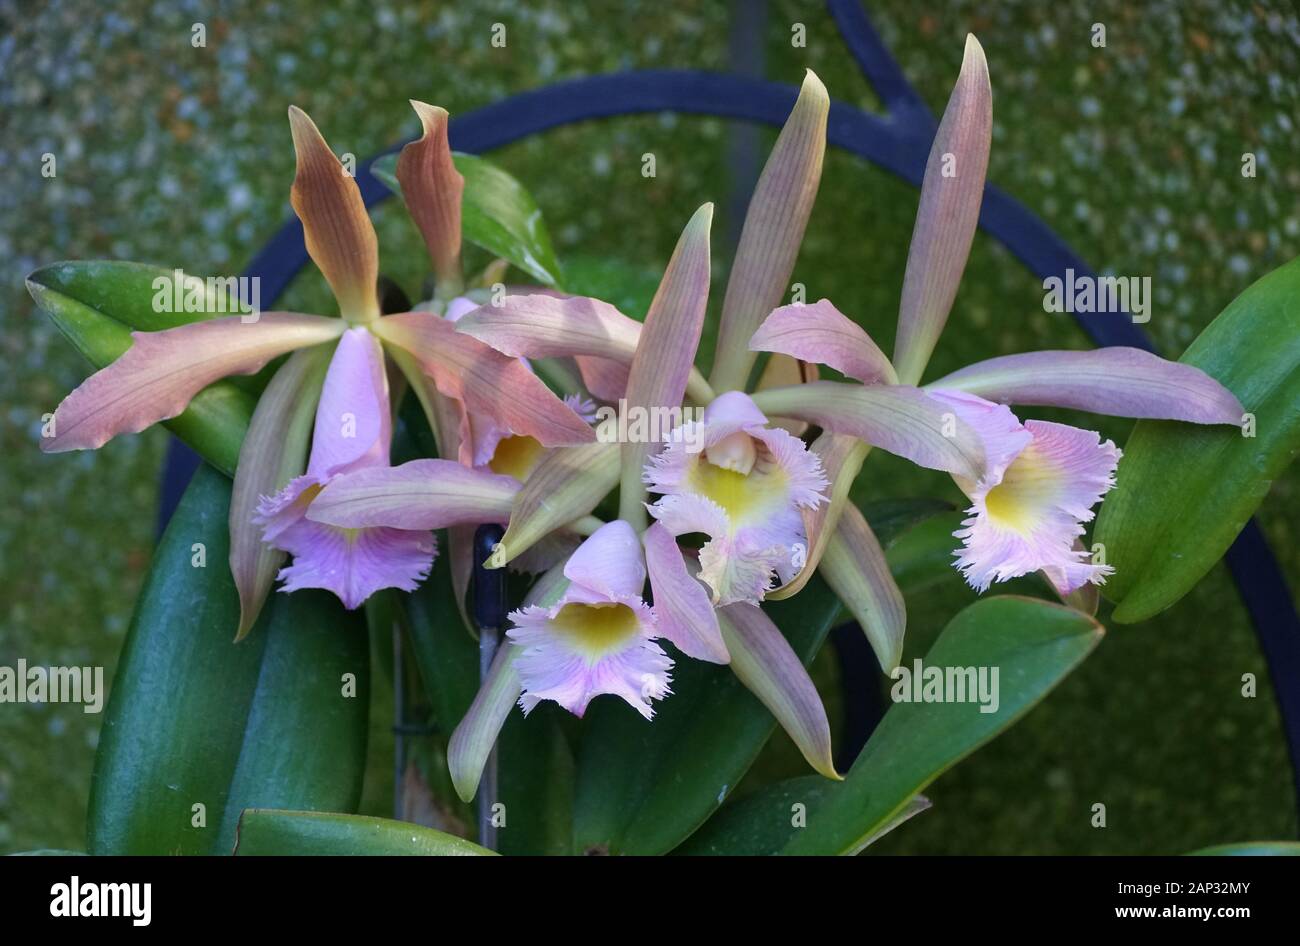 Light purple and white color of tiny Cattleya orchids Stock Photo